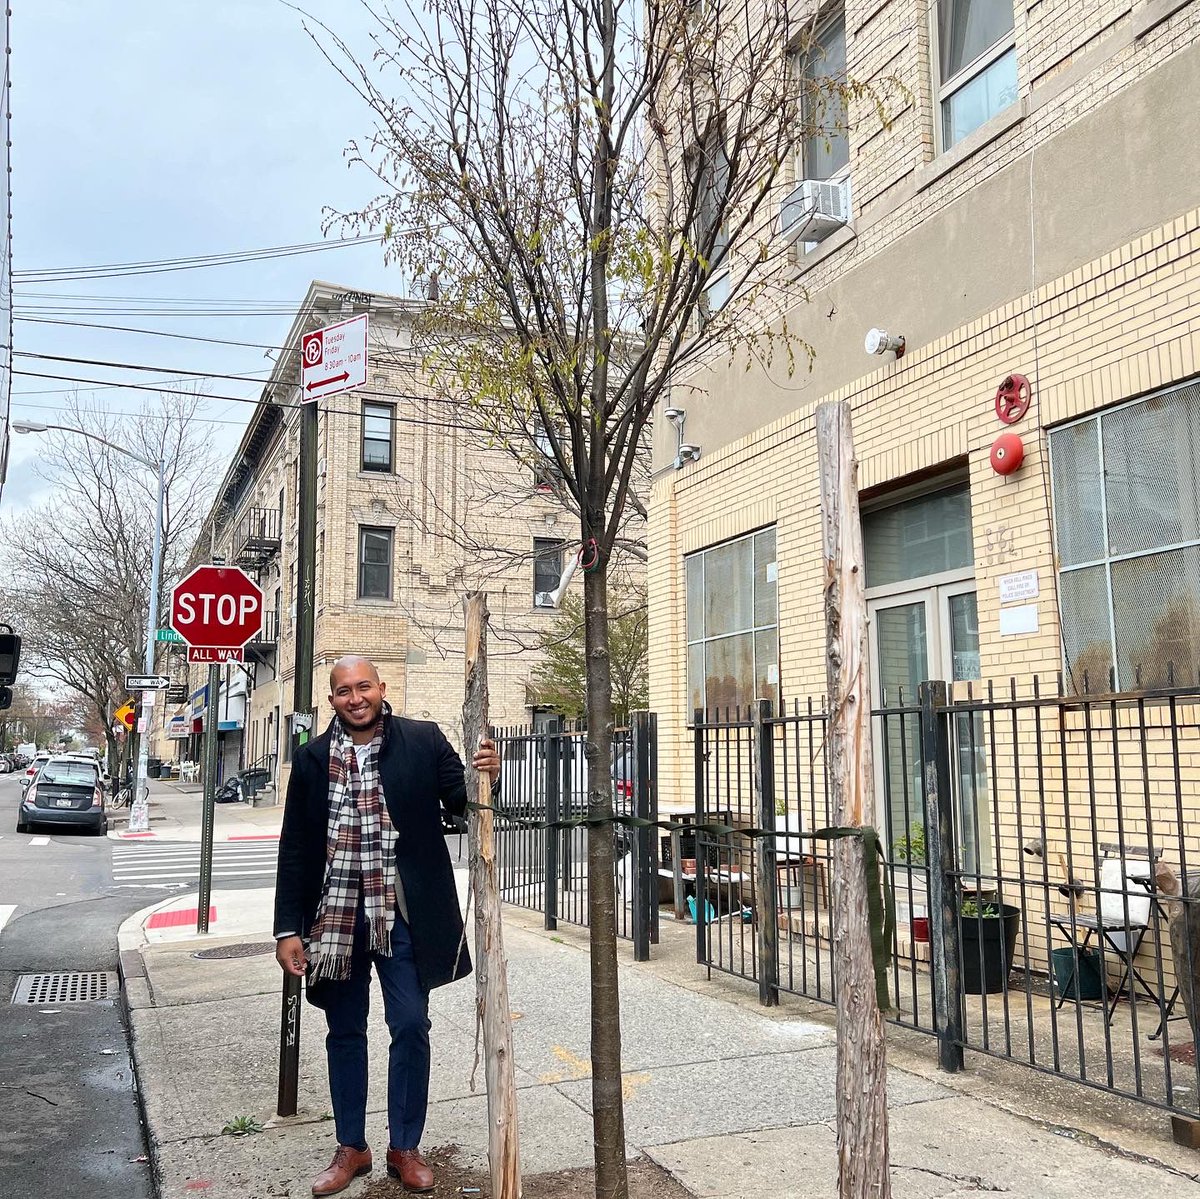 🌳 Slight chance of rain but that’s great for the soil of our greener, newer neighbors on Woodward Ave! Let’s keep fighting for expansion of trees in our community. A greener Woodward, is a greener #Ridgewood. #Sunnyside #Ridgewood #Maspeth #Woodside #LIC